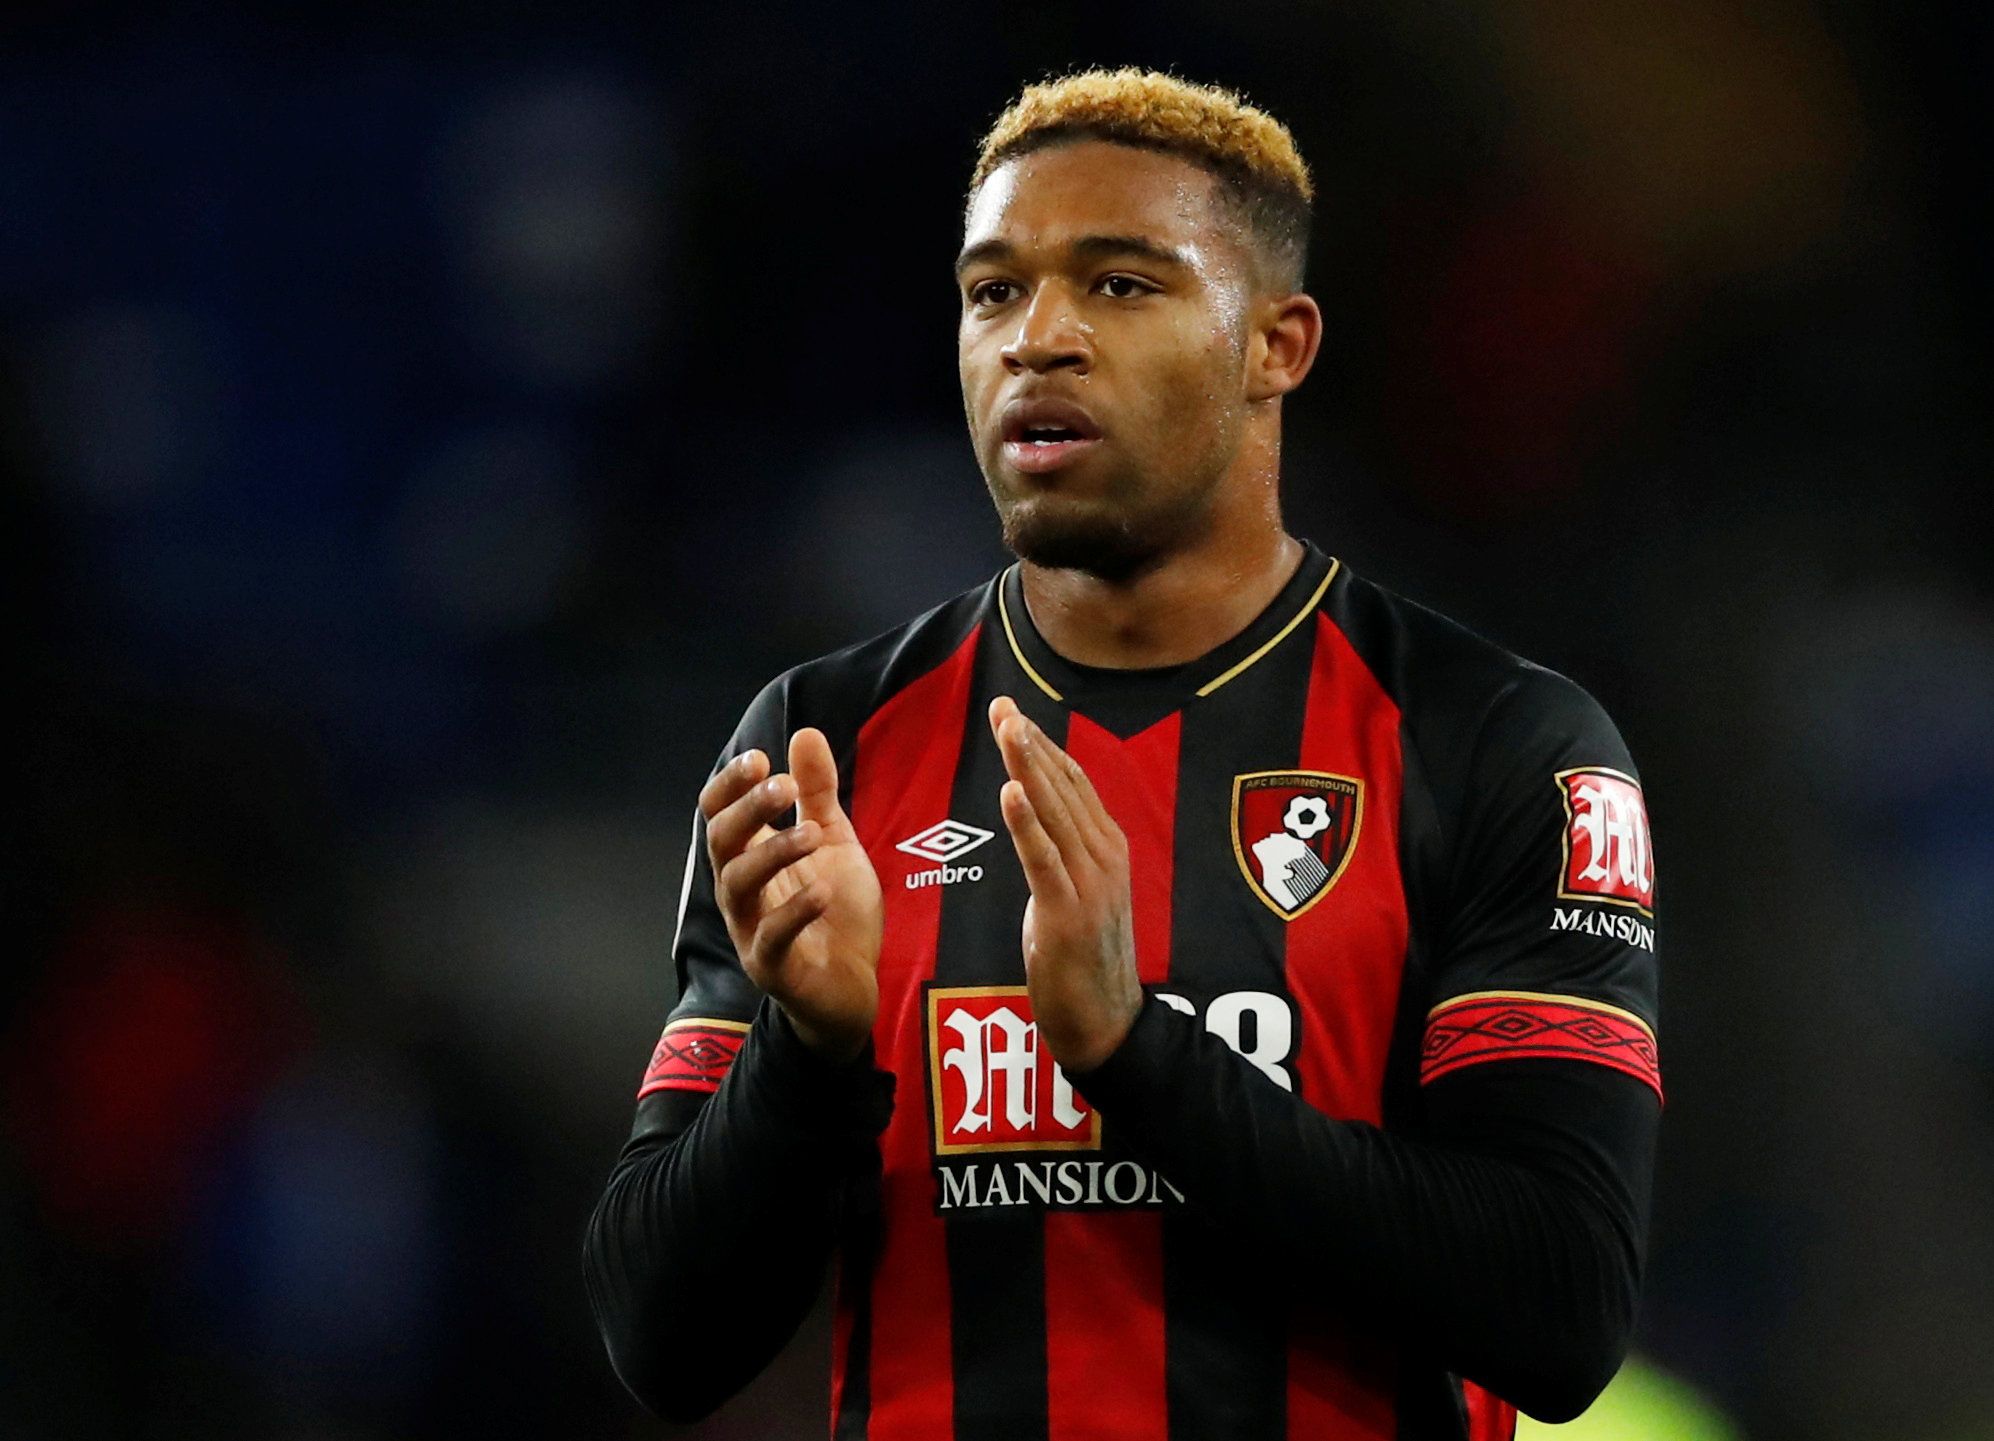 Soccer Football - Premier League - Cardiff City v AFC Bournemouth - Cardiff City Stadium, Cardiff, Britain - February 2, 2019  Bournemouth's Jordon Ibe applauds the fans at the end of the match   Action Images via Reuters/Andrew Boyers  EDITORIAL USE ONLY. No use with unauthorized audio, video, data, fixture lists, club/league logos or "live" services. Online in-match use limited to 75 images, no video emulation. No use in betting, games or single club/league/player publications.  Please contact